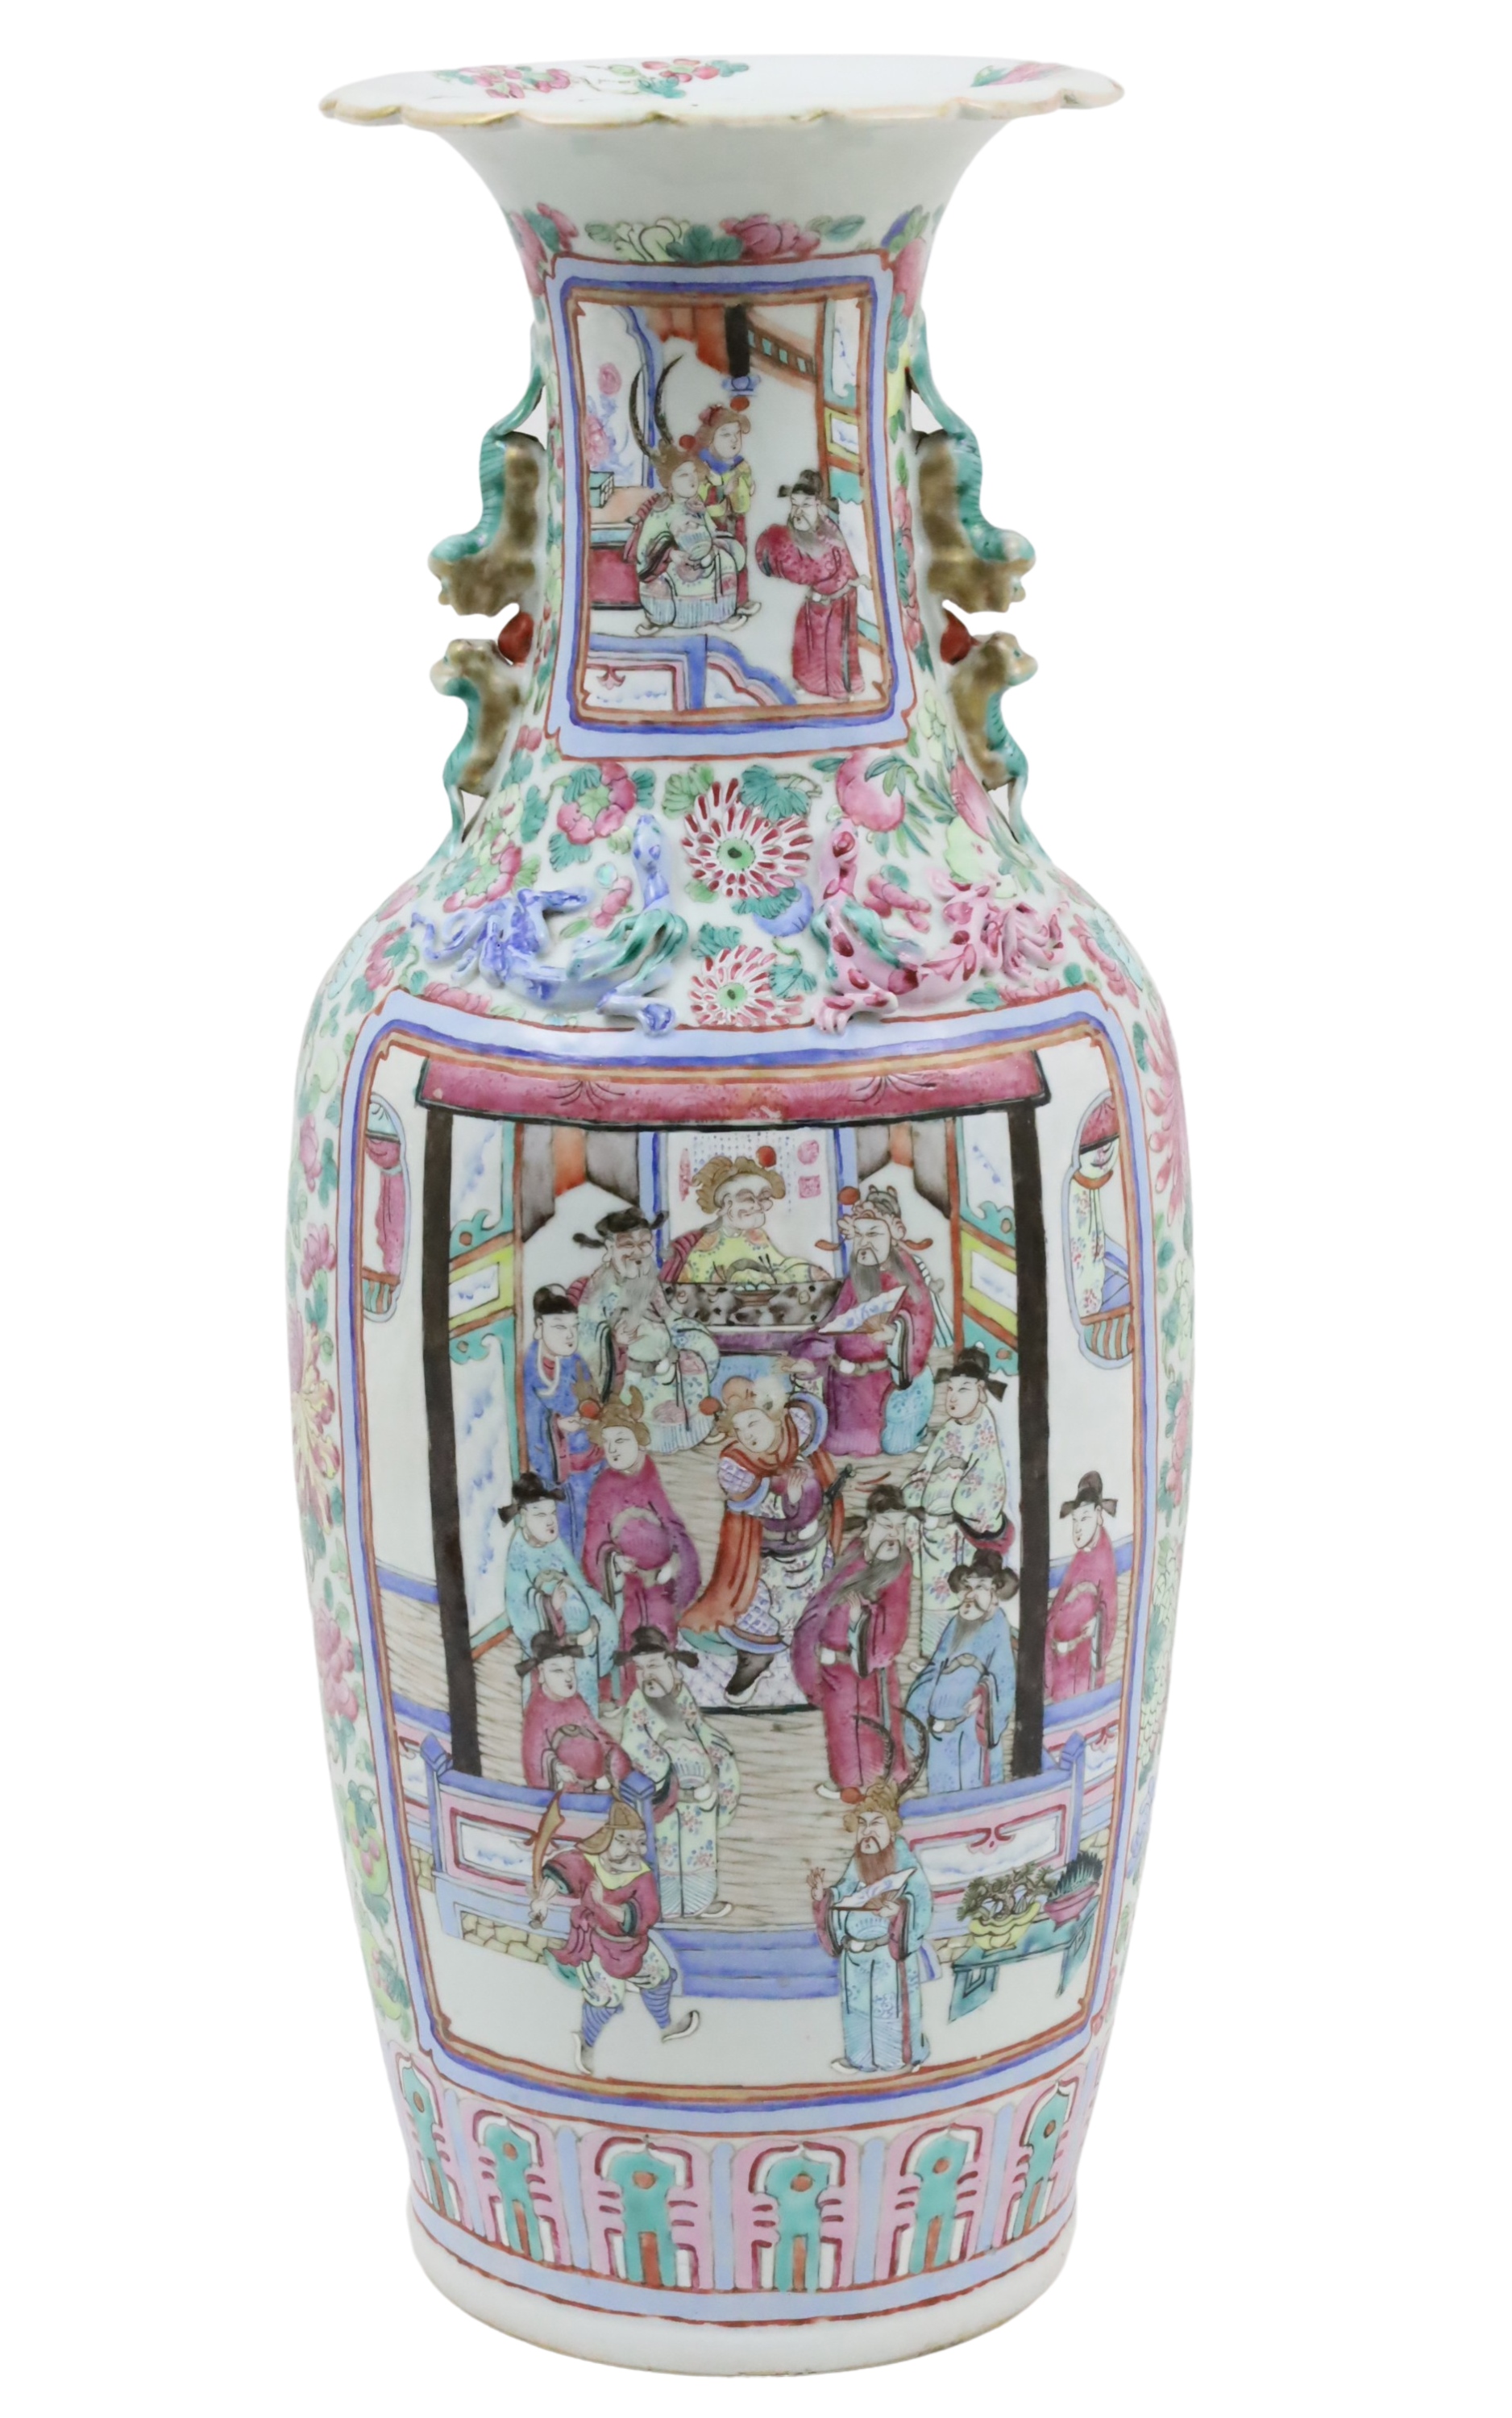 25" CHINESE ROSE FAMILLE PORCELAIN